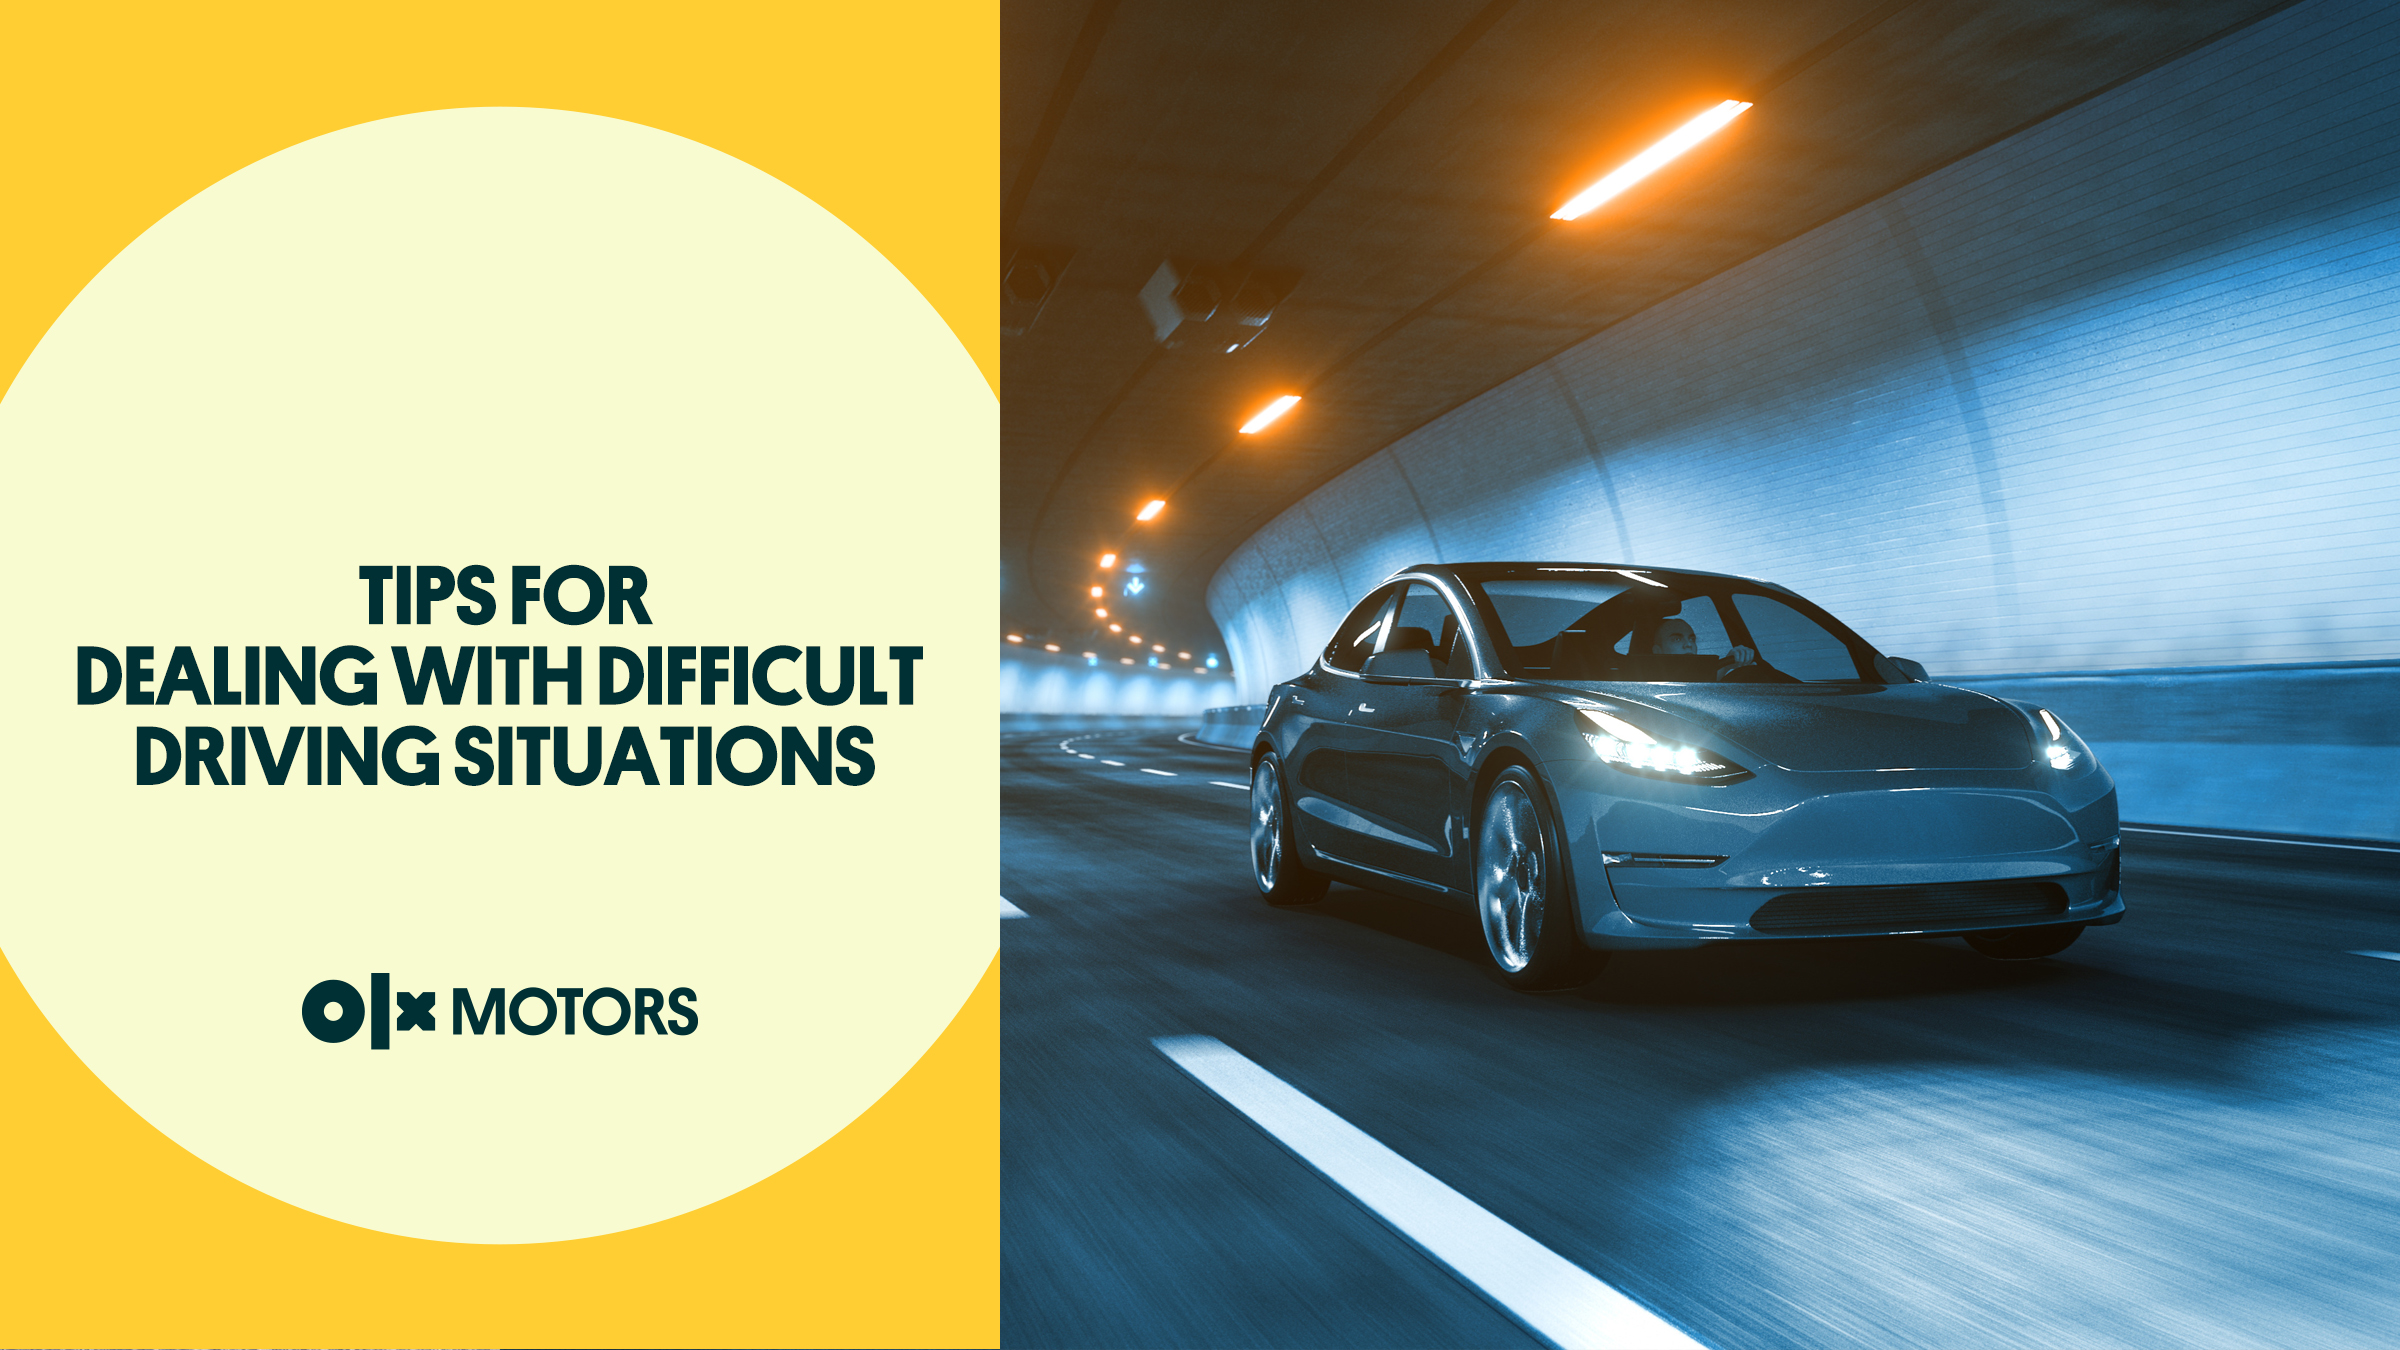 Tips for Dealing with Difficult Driving Situations